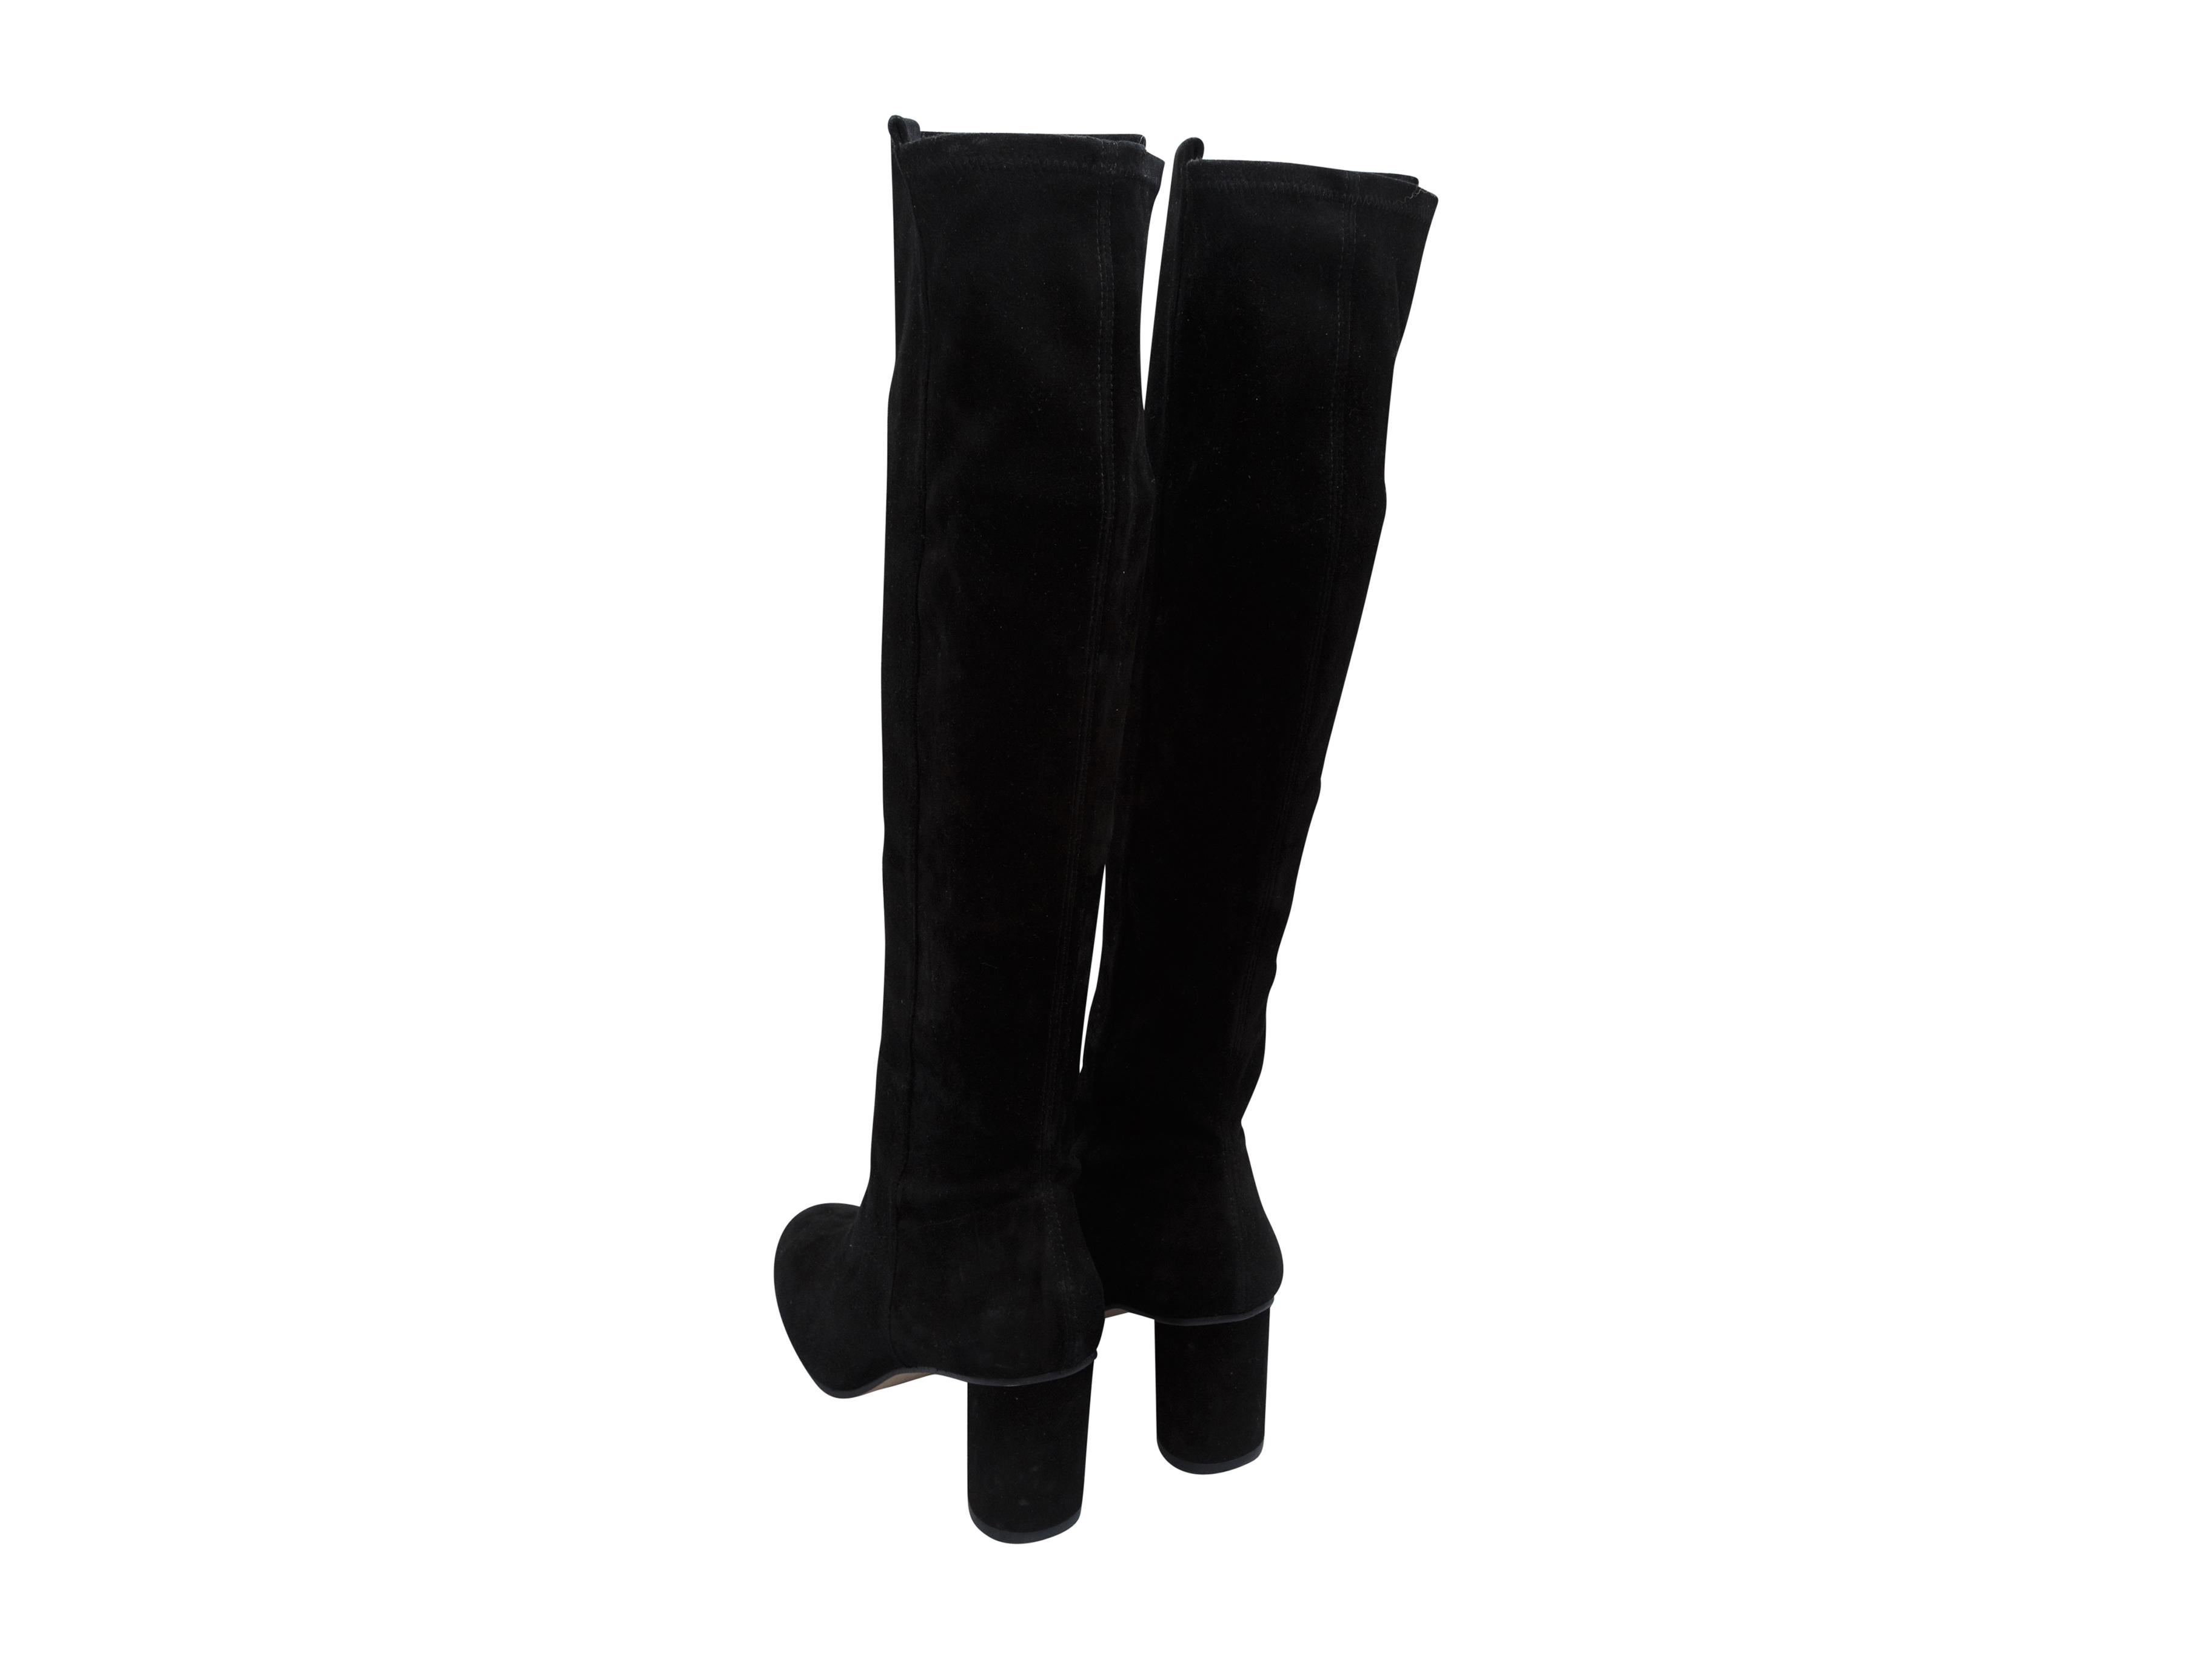 Product details: Black suede knee-high boots by Stuart Weitzman. Round-toes. Block heels.
Condition: Pre-owned. Very good.
Est. Retail $ 600.00